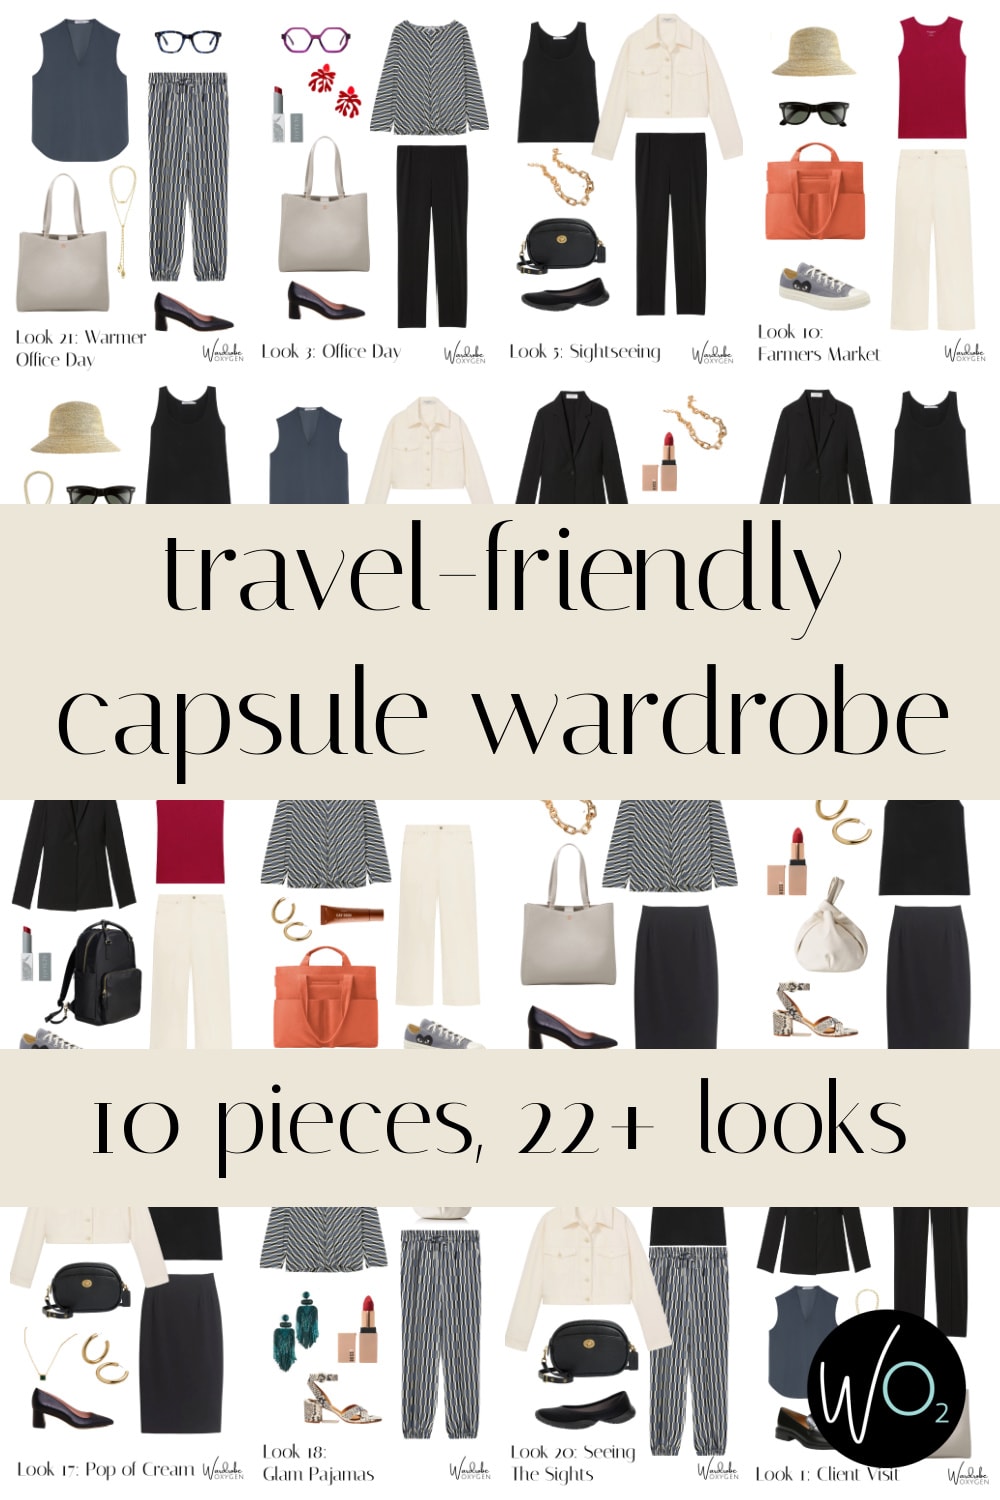 High style, low maintenance: Your wrinkle-free capsule wardrobe is here